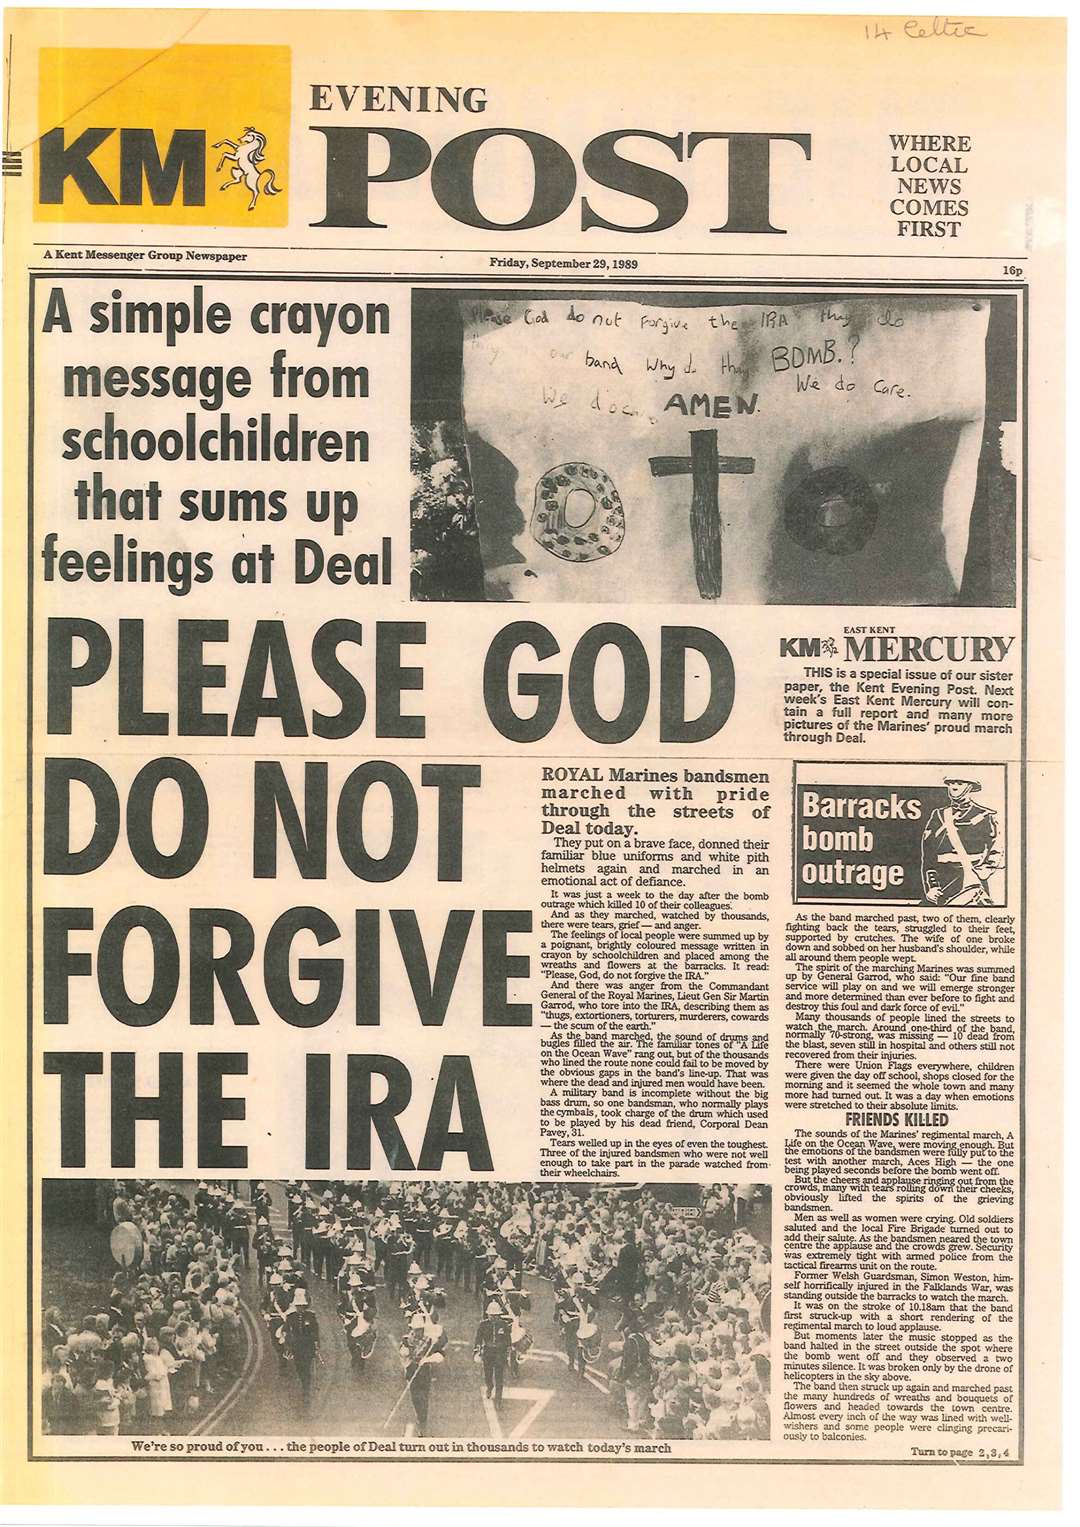 The Evening Post bore the message 'Please God do not forgive the IRA' after the bombing of the Royal Marines barracks